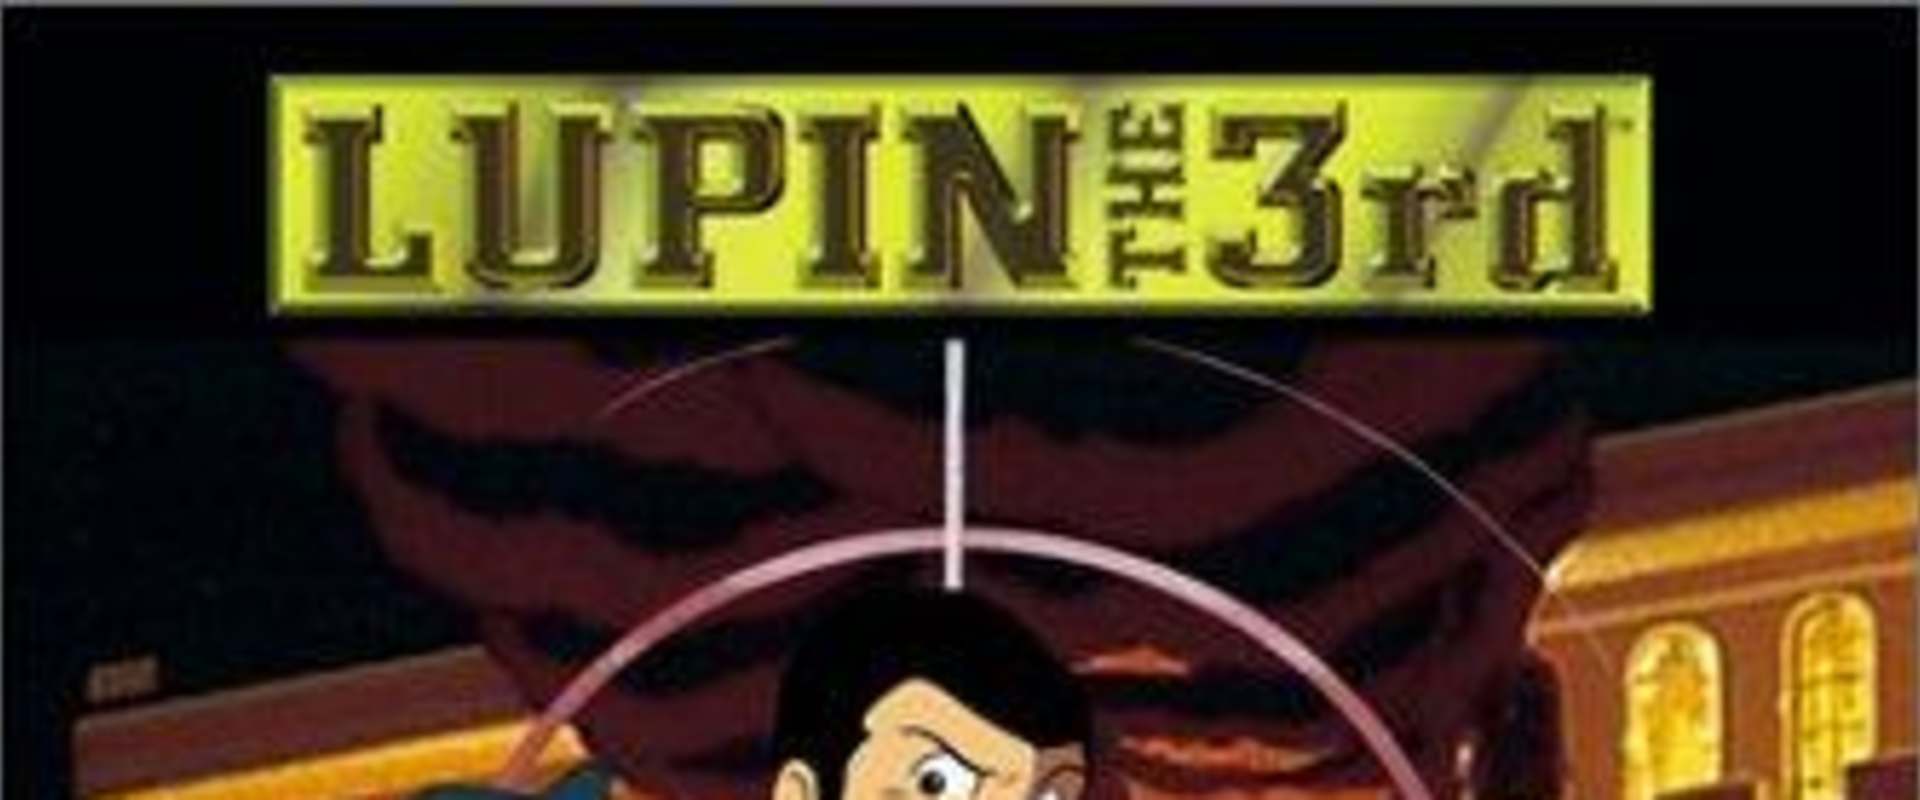 Lupin III: Voyage to Danger background 1